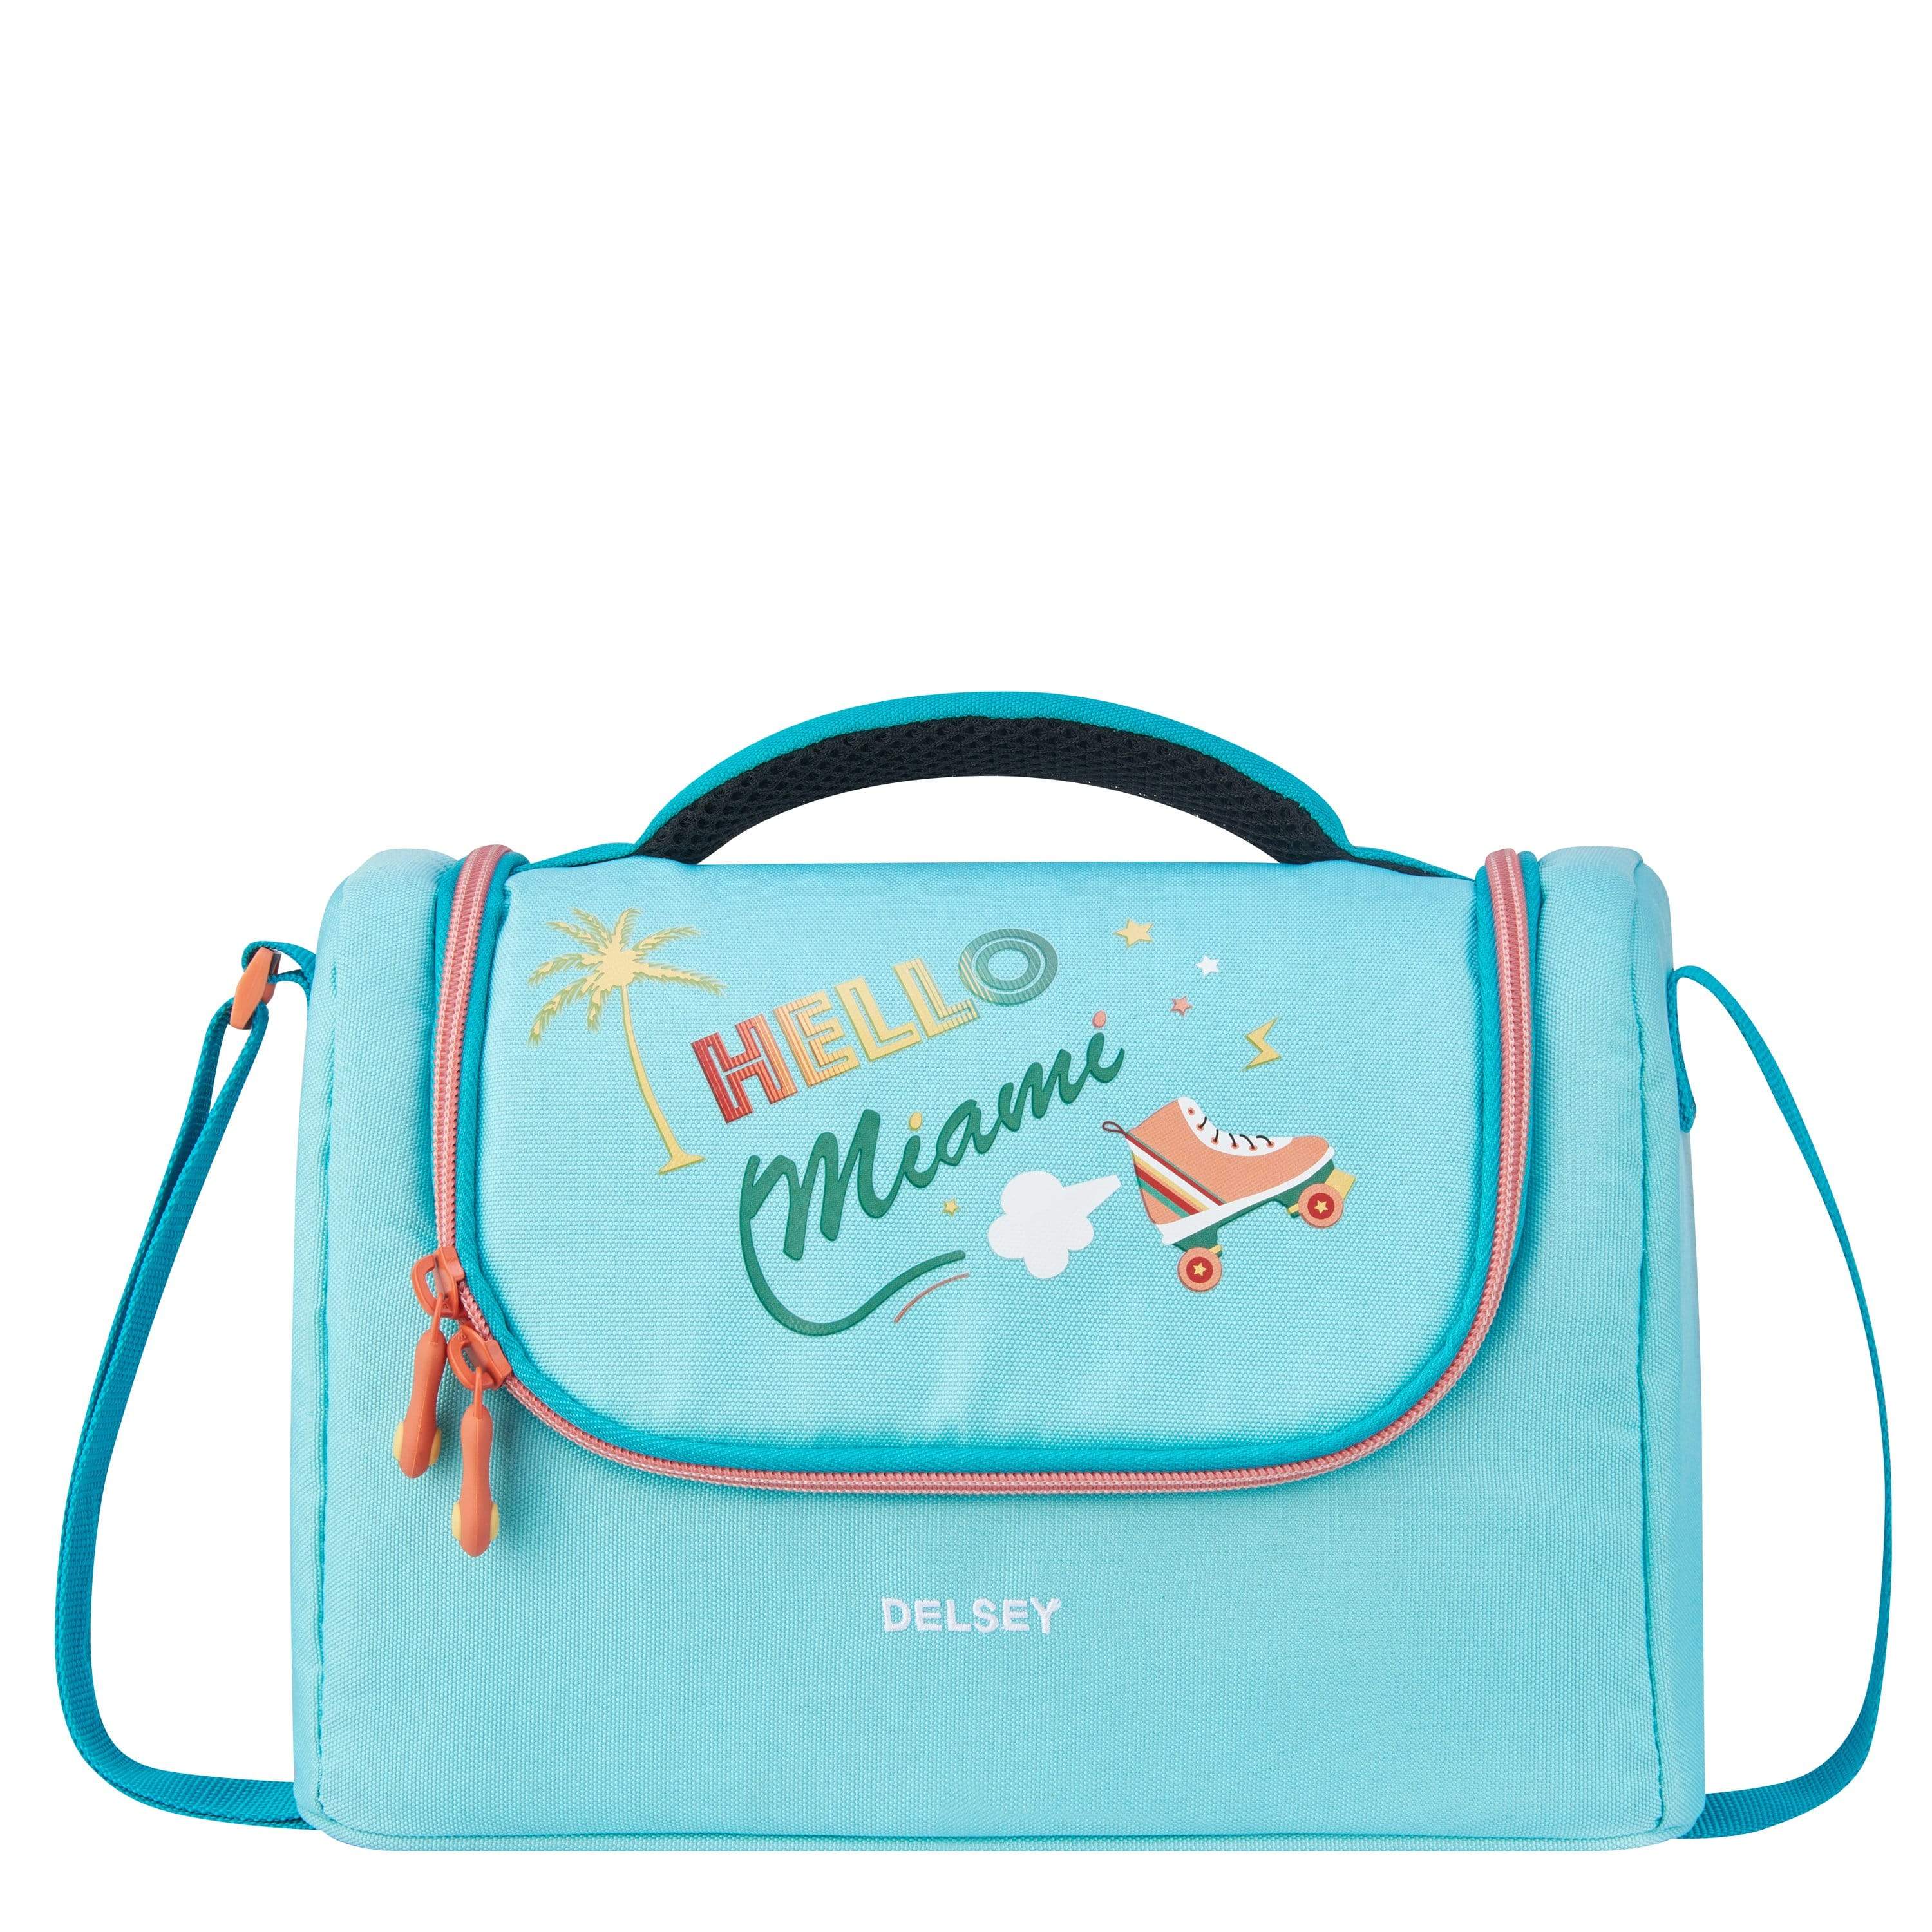 DELSEY SCHOOL 2019 ISOTHERM LUNCH BAG MIAMI TURQUOISE 00339319012 TURQUOISE